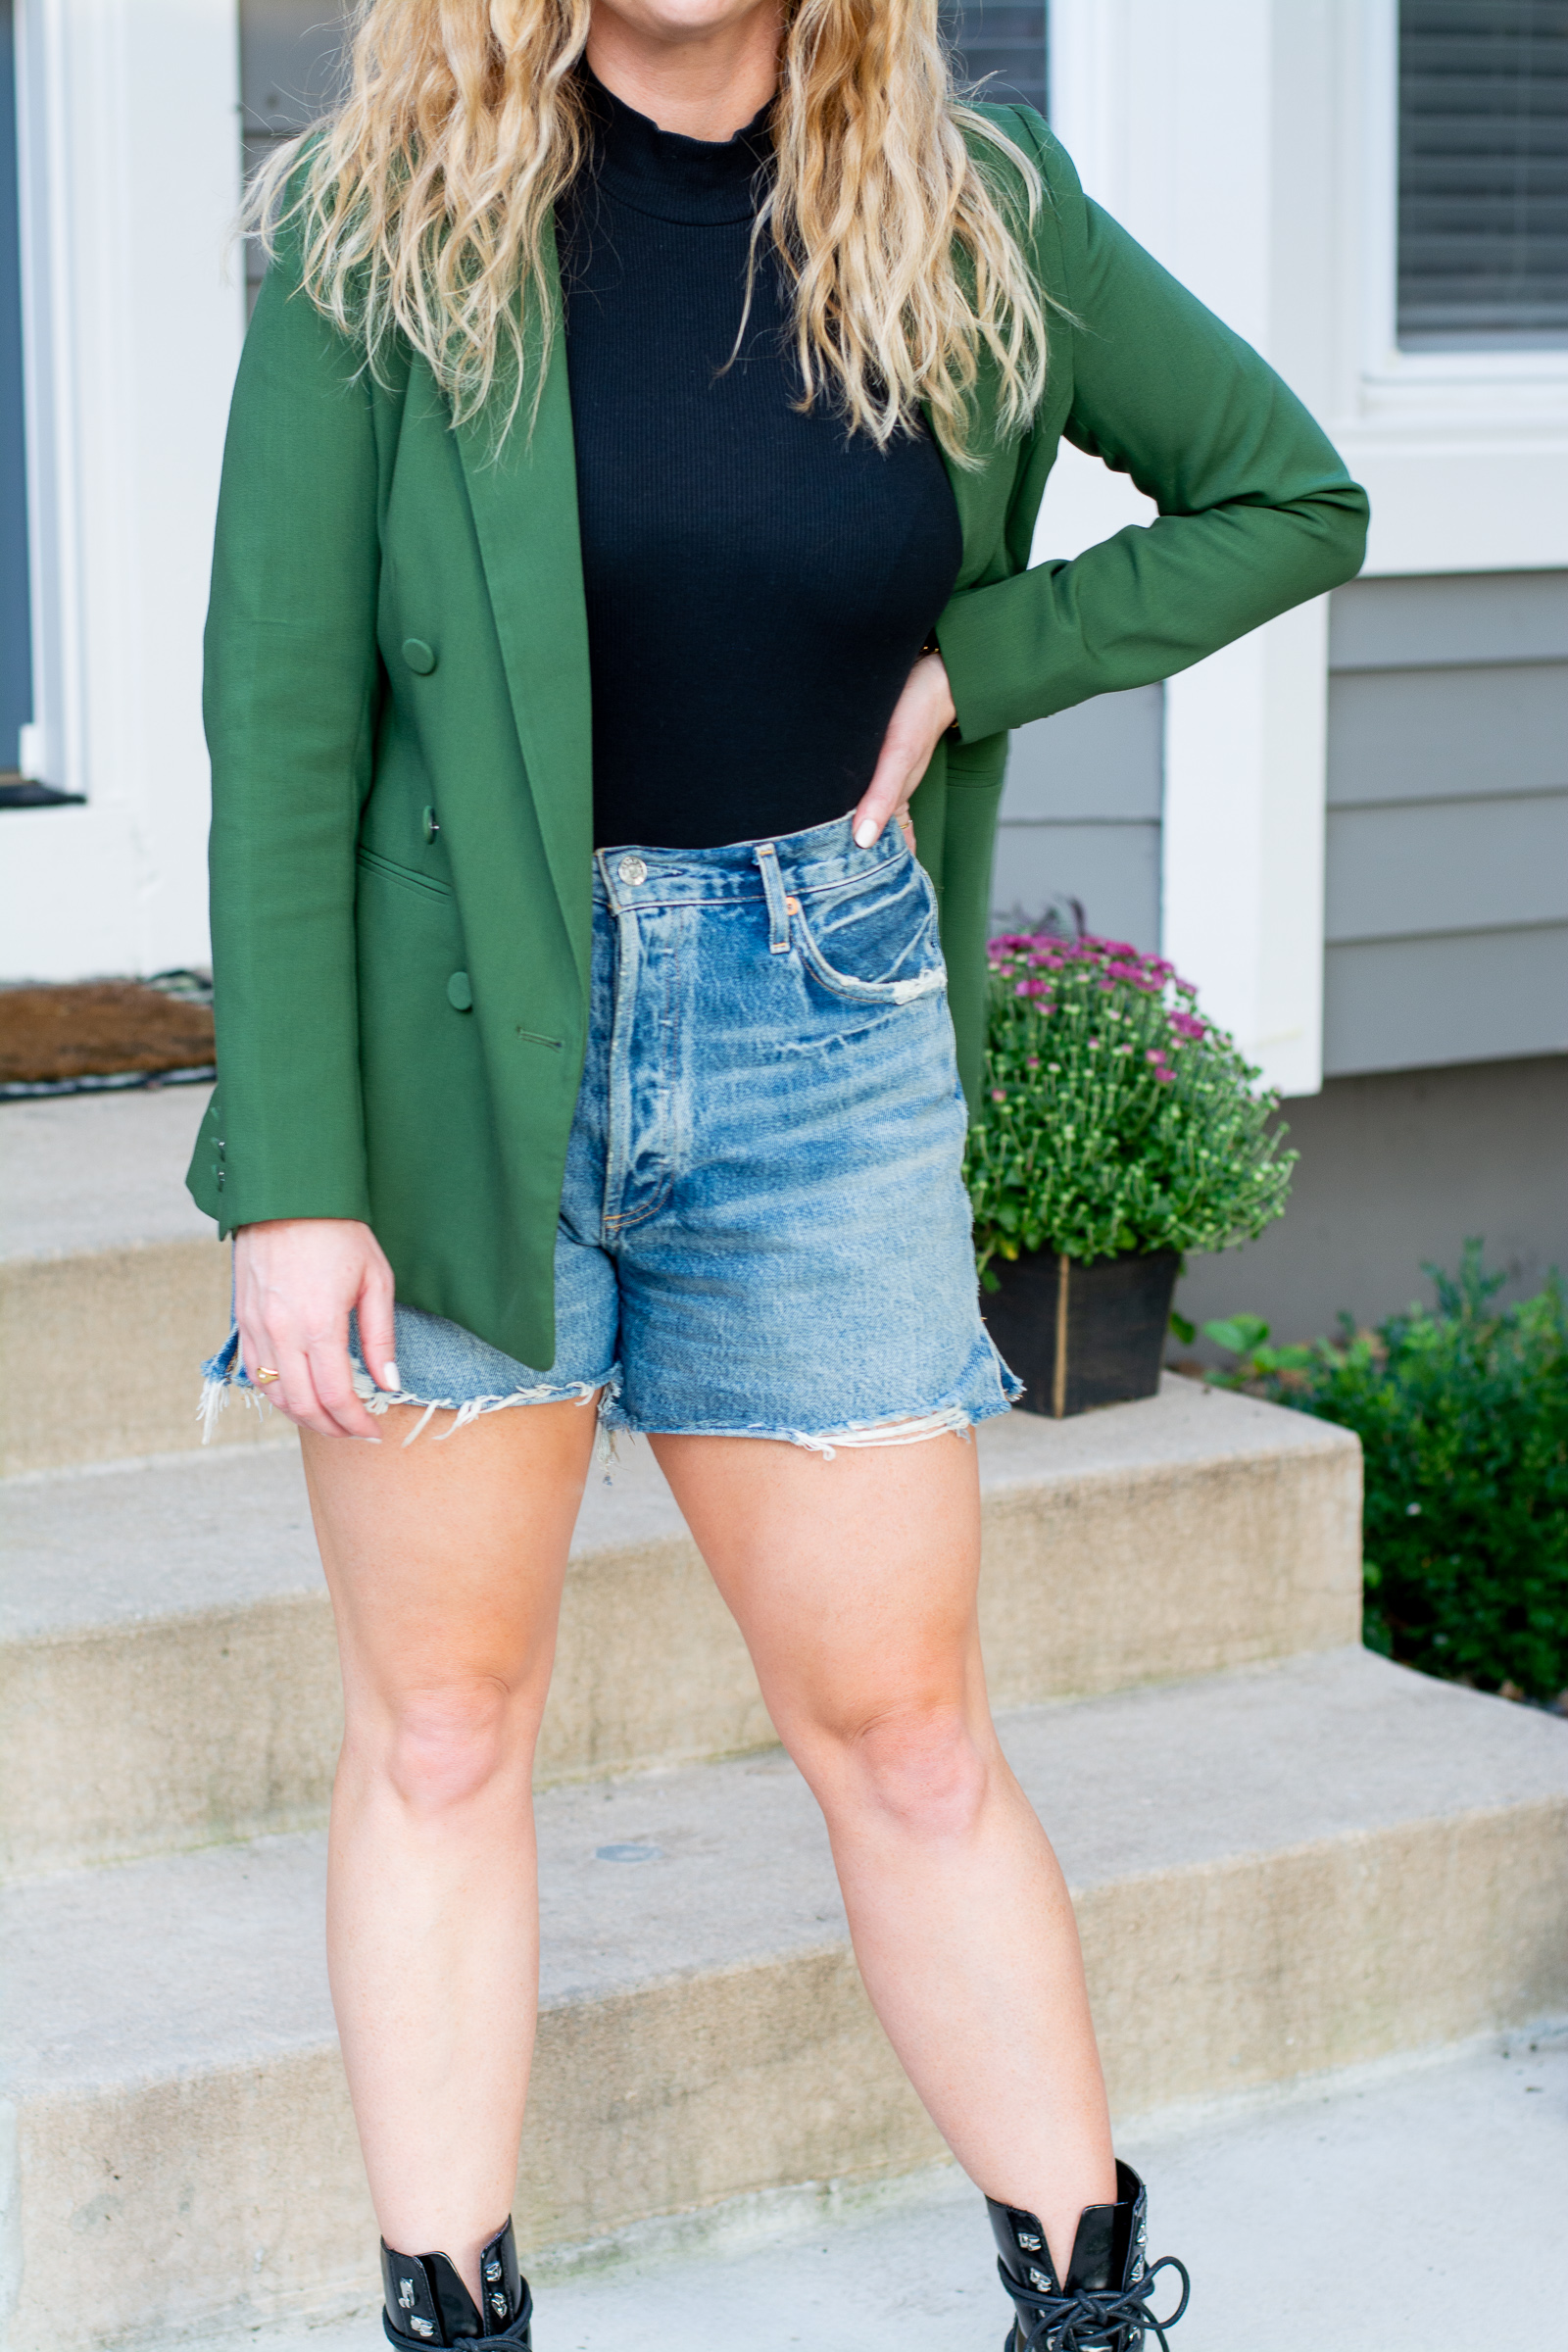 Fall Transition Outfit: Blazers and Cutoff Shorts. | LSR